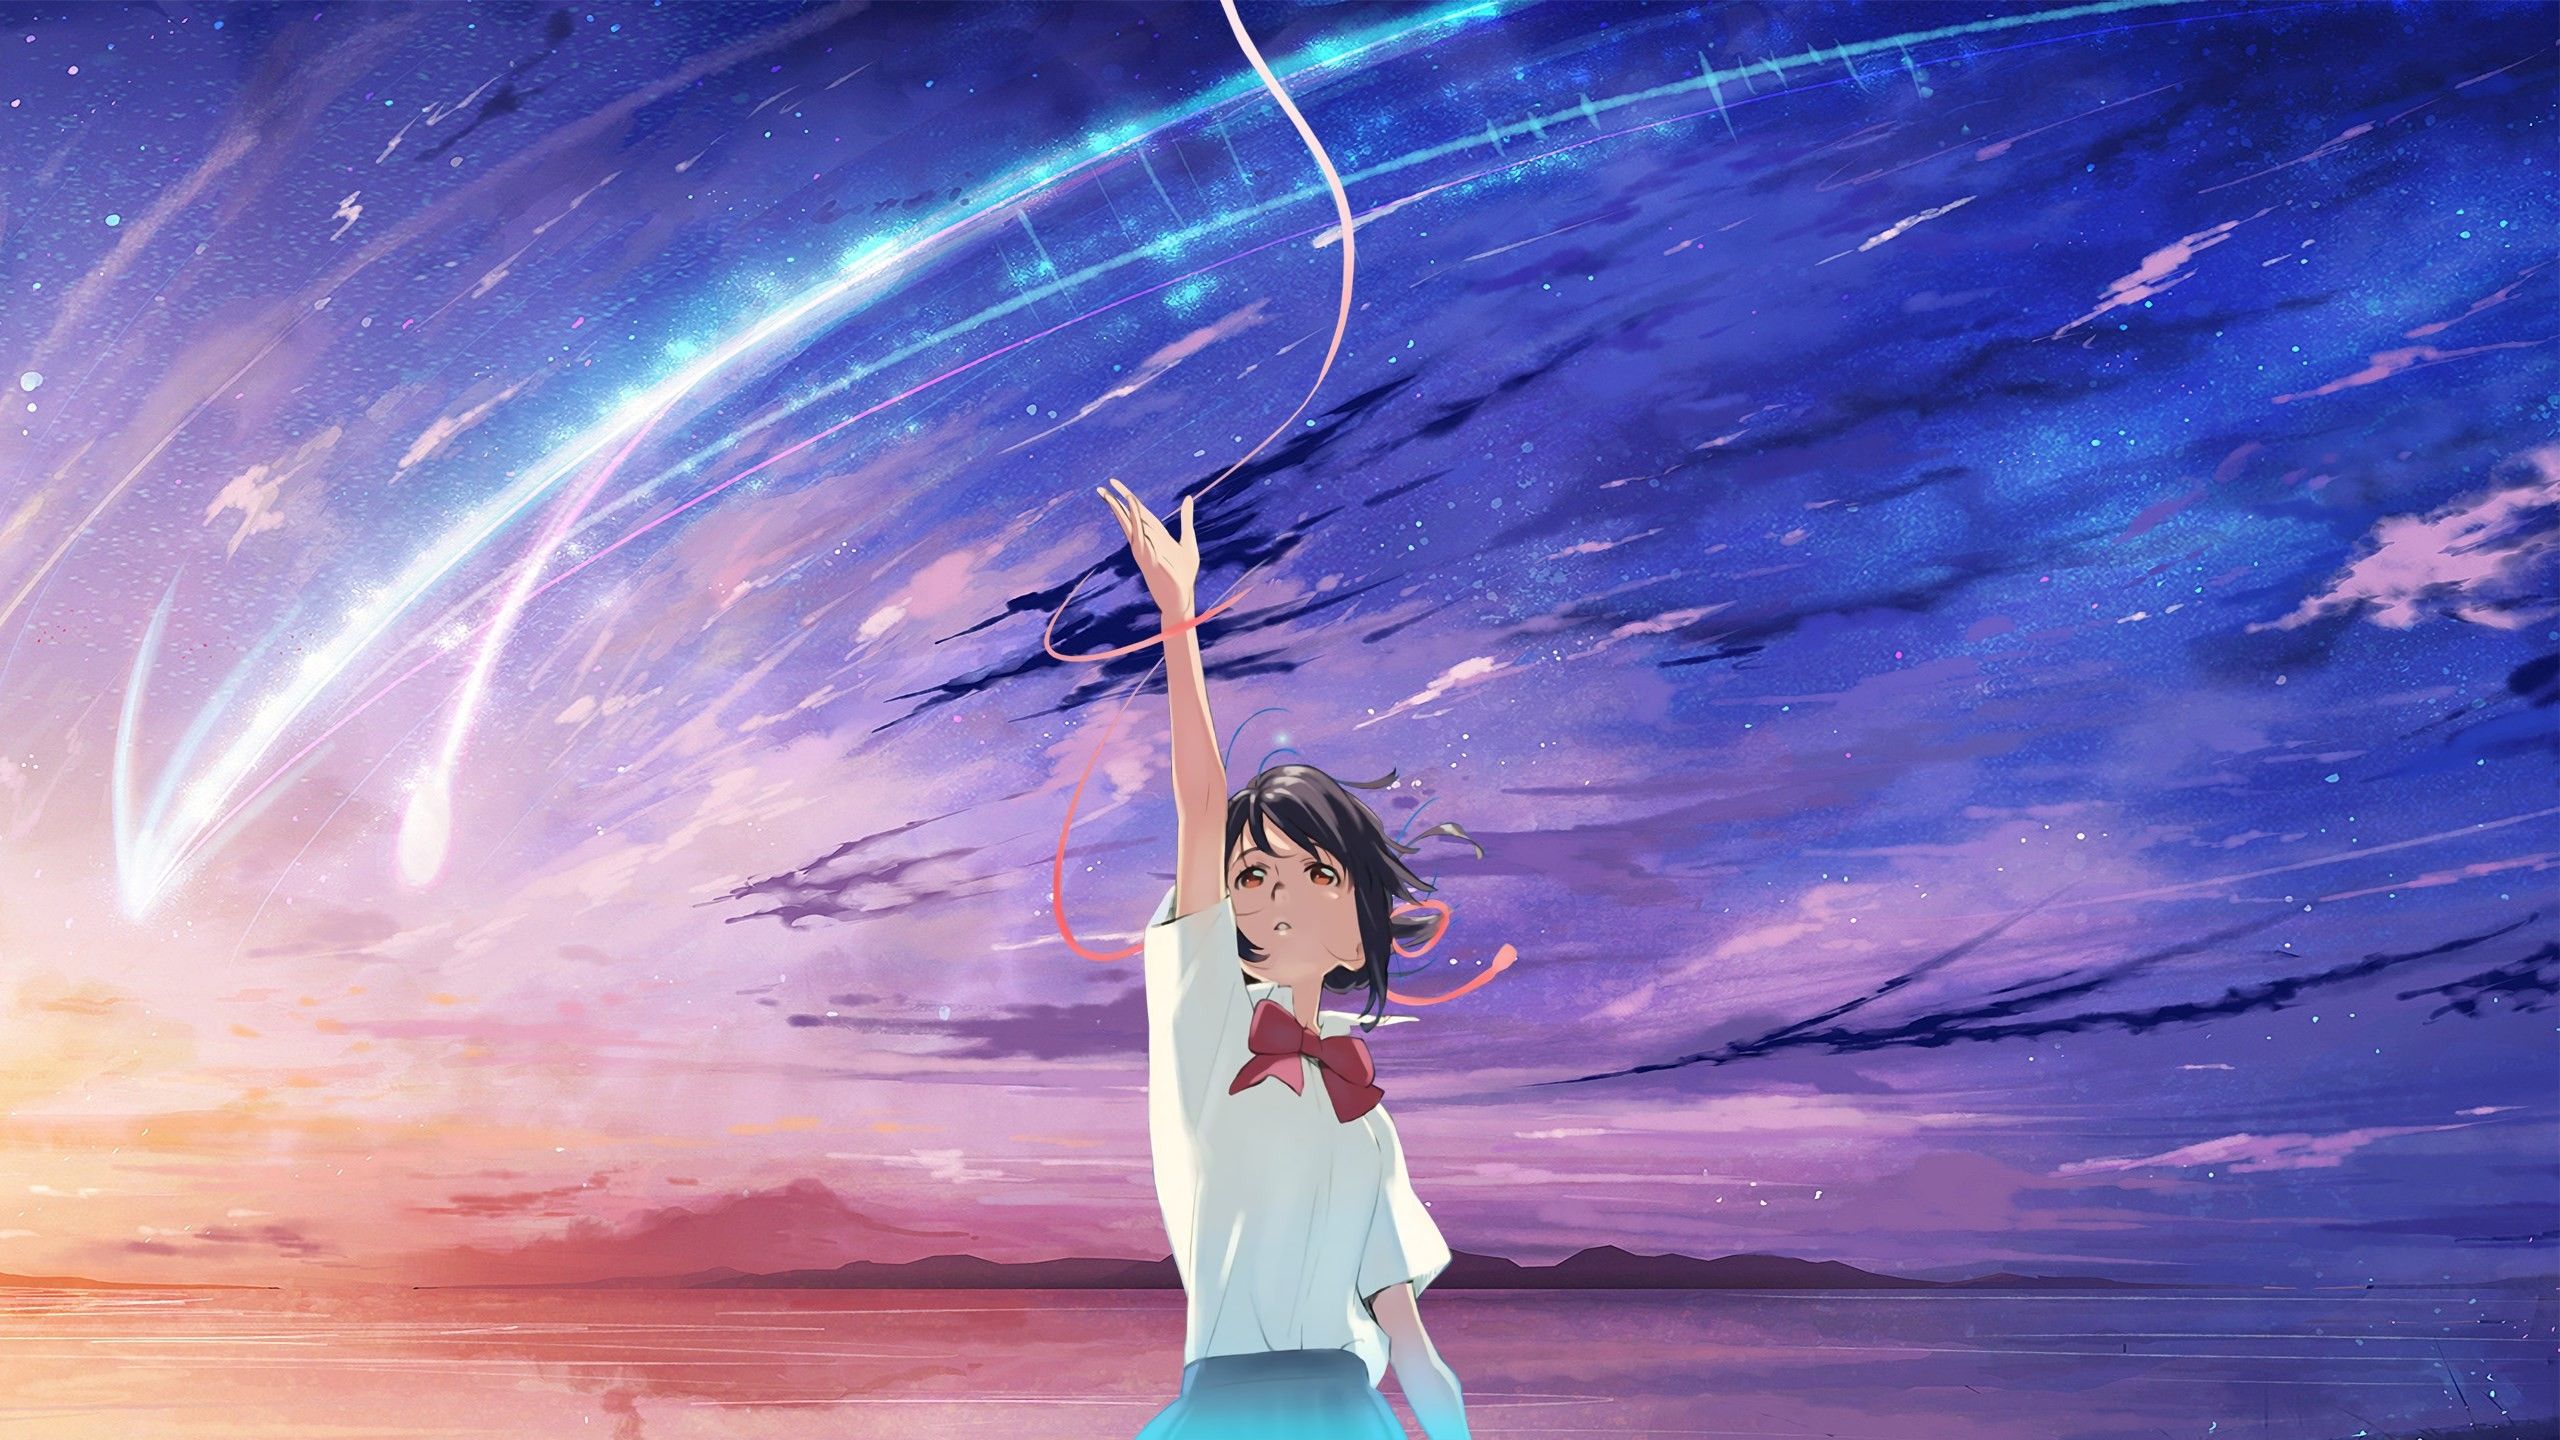 Aesthetic Anime Wallpaper Your Name